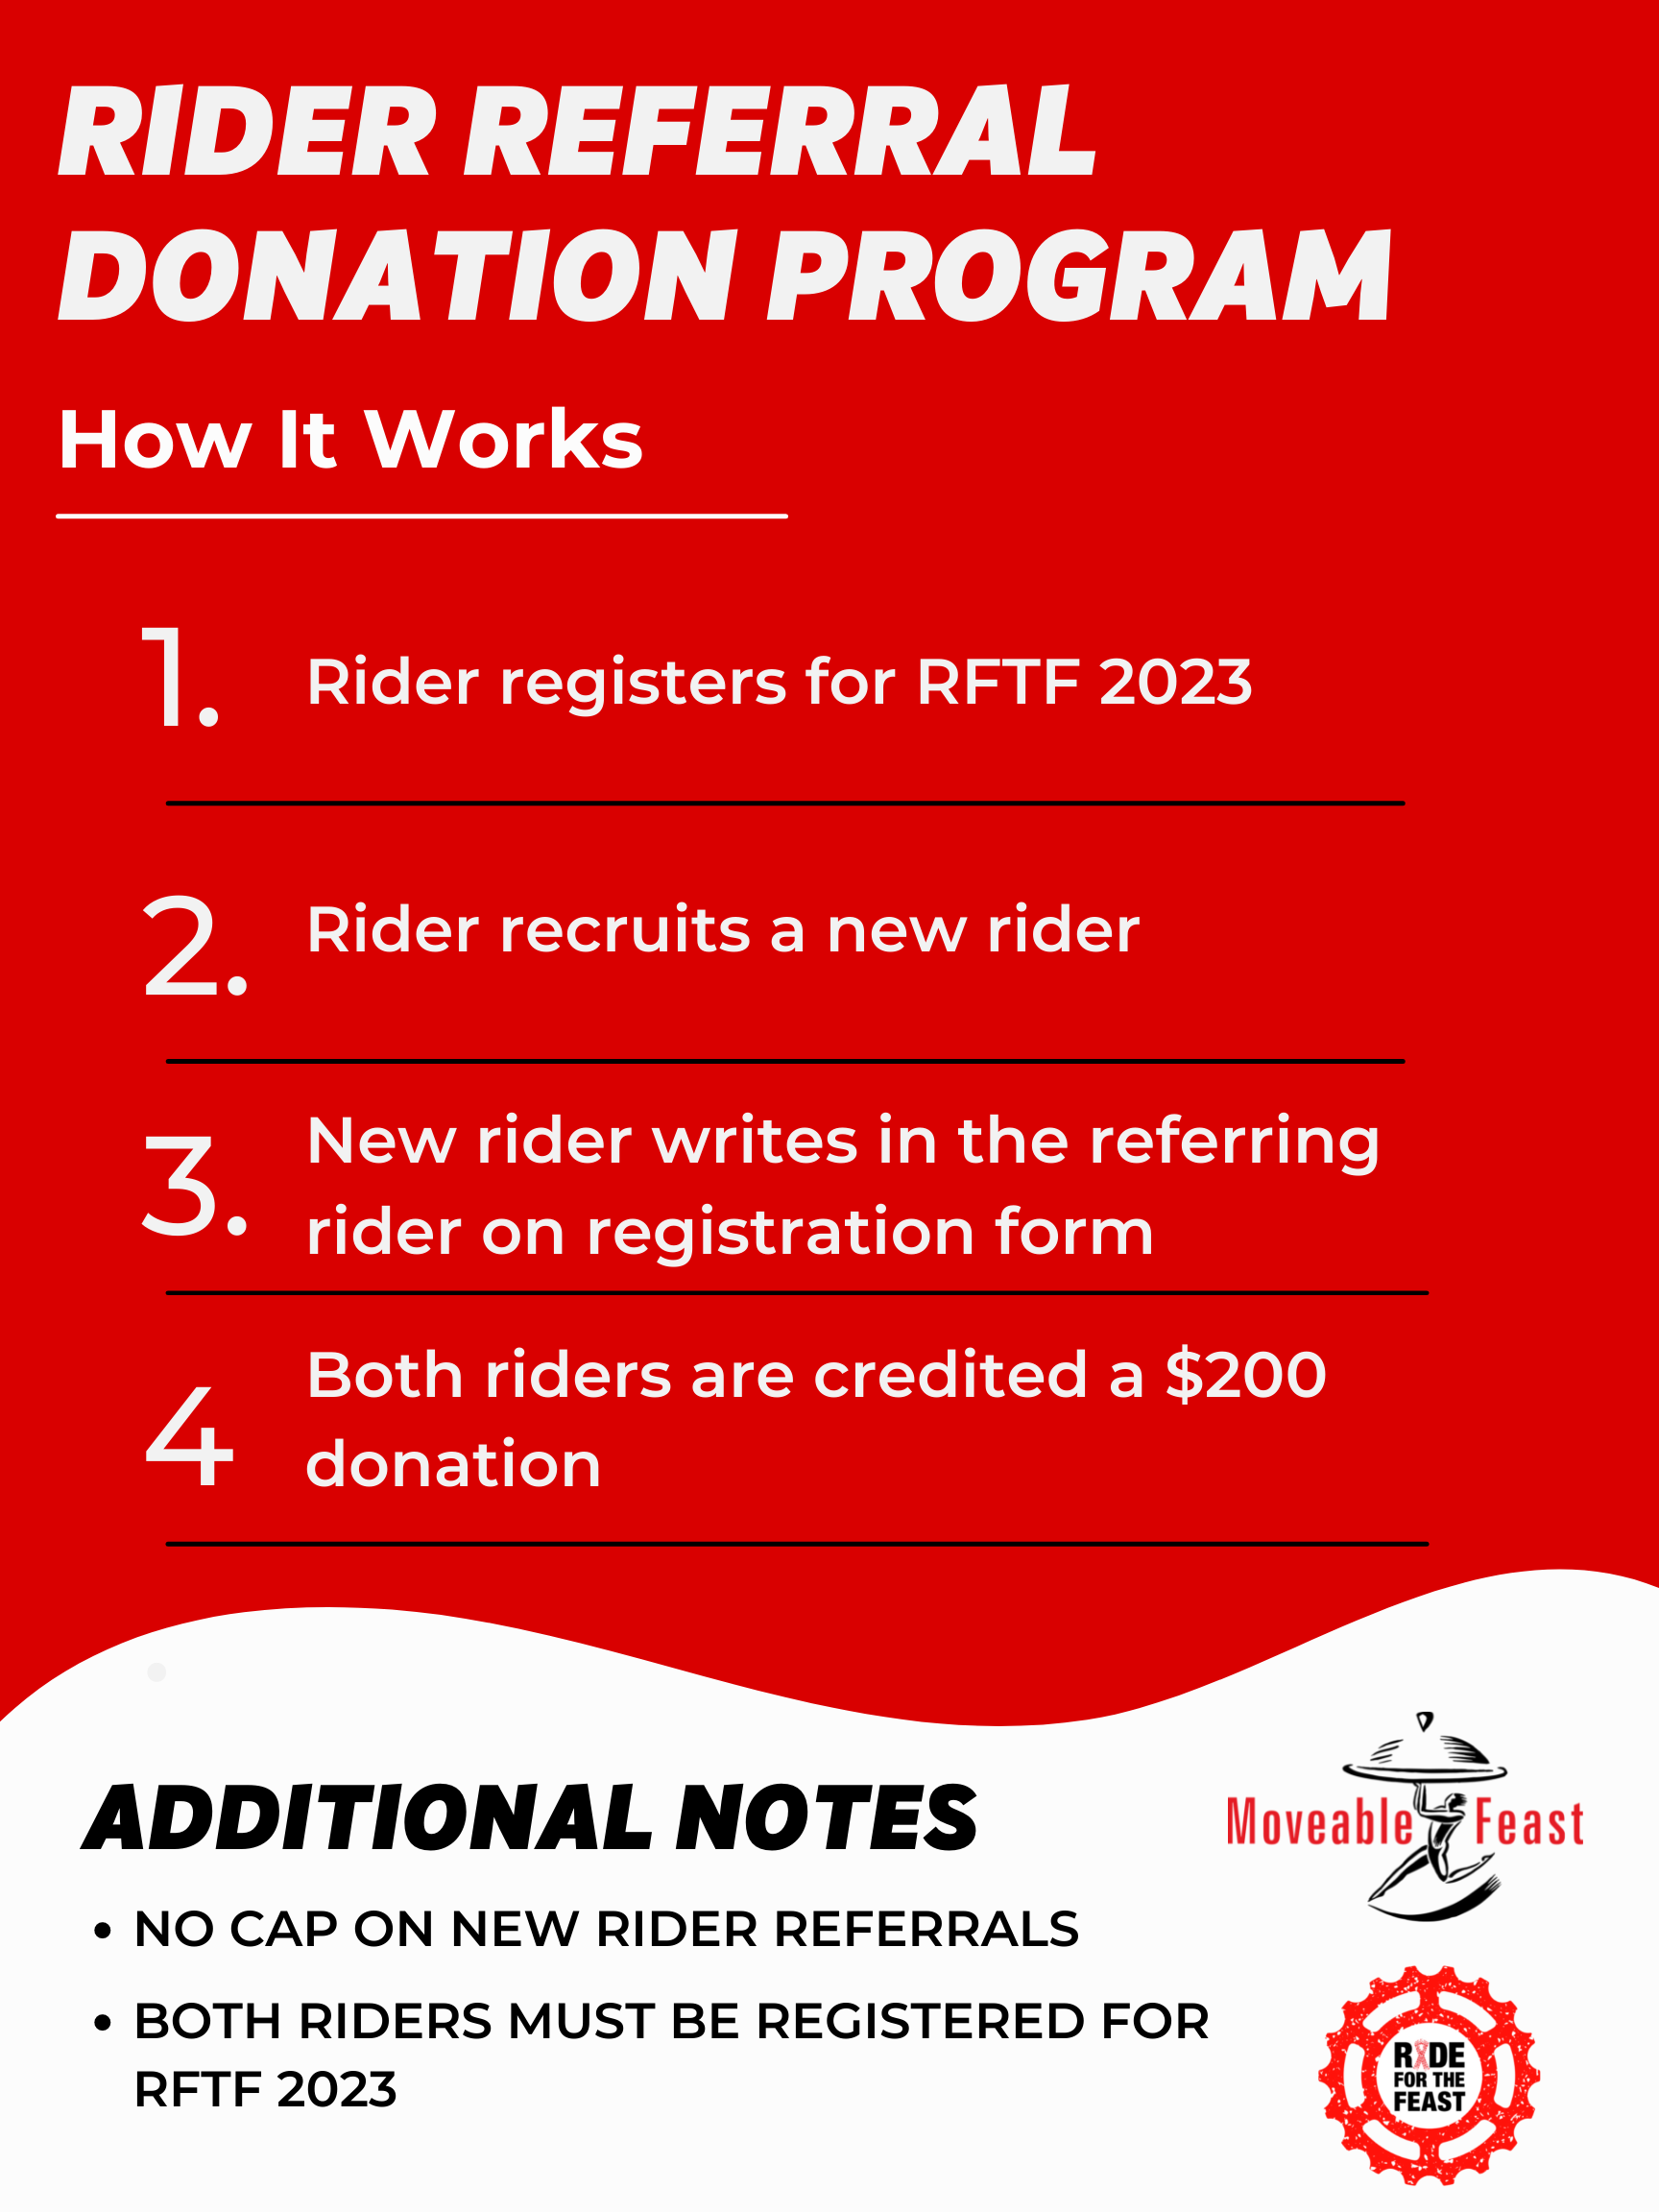 Rider-Referral-Flyer-Donation-Program-Featured-Image